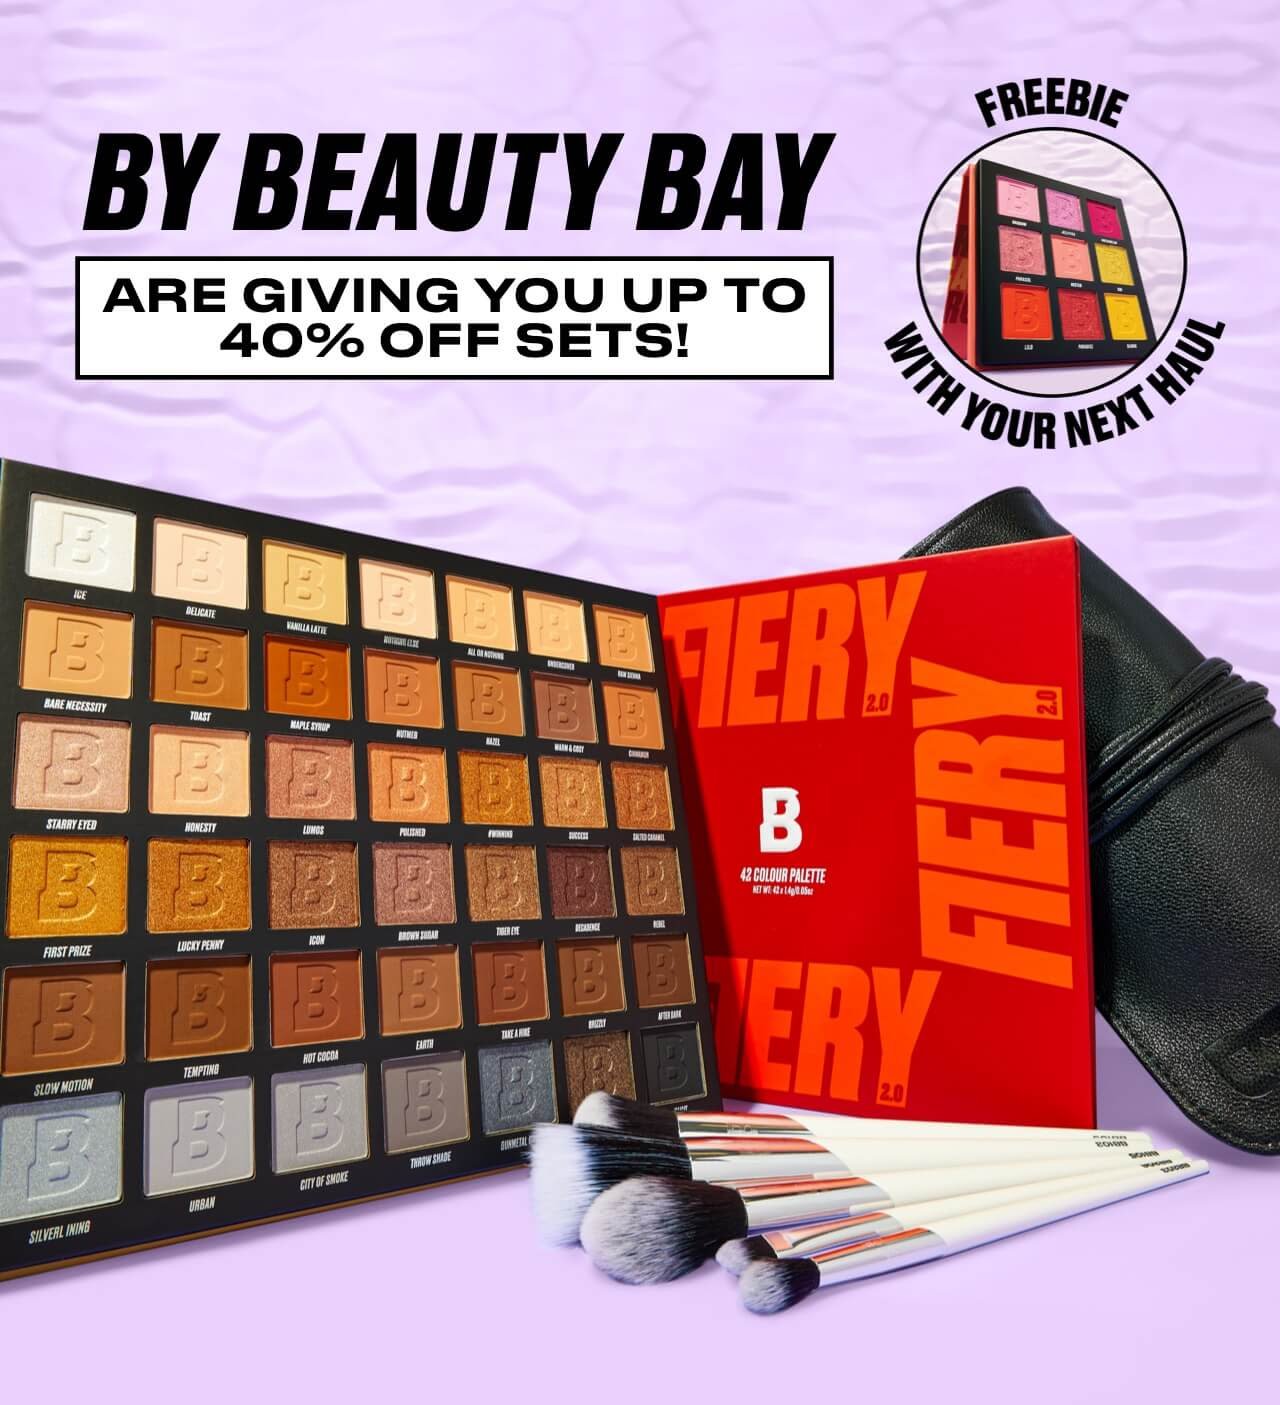 Up to 40% off Sets By BEAUTY BAY